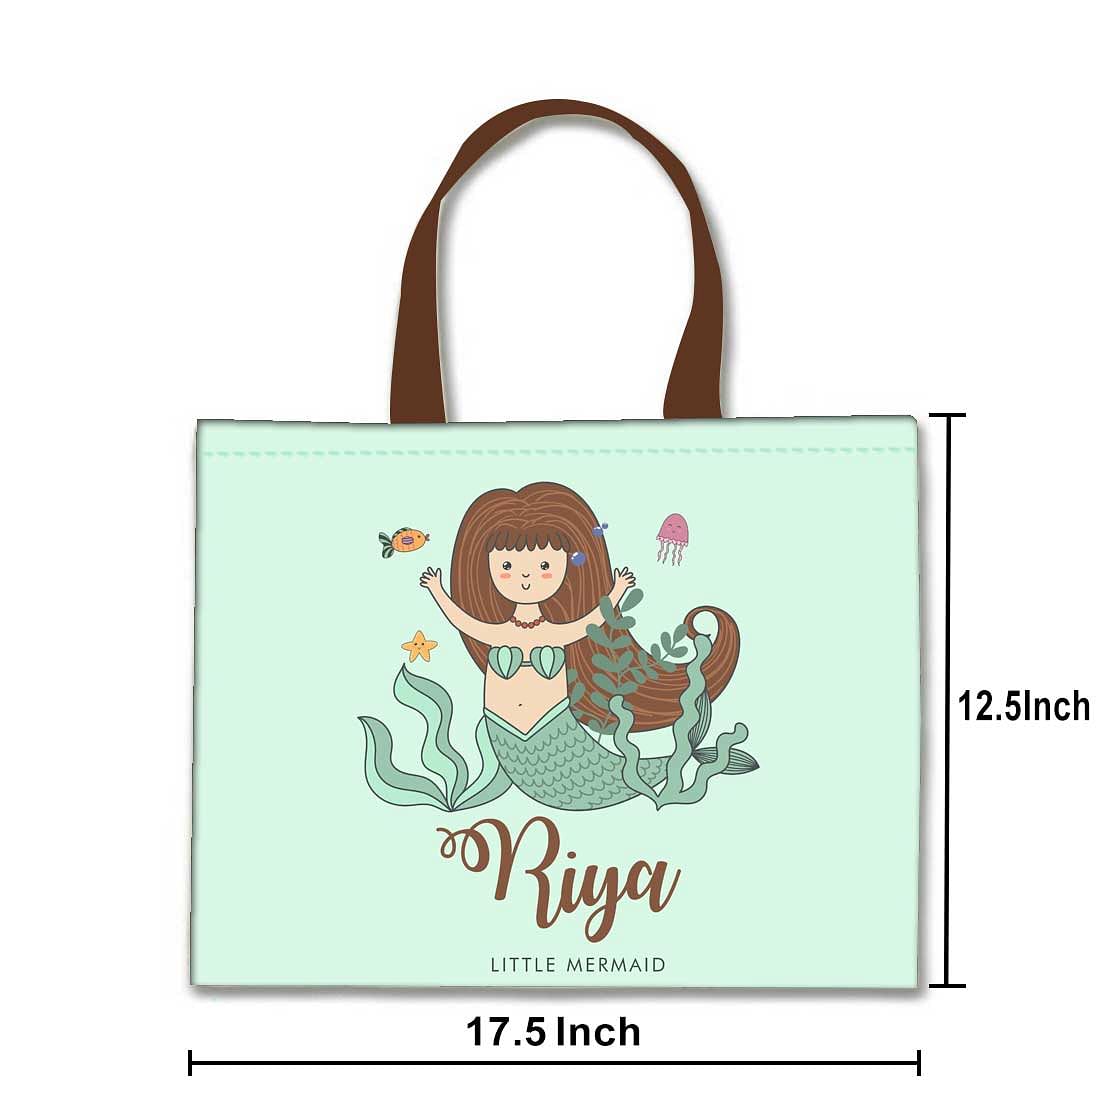 Nutcase Personalized Tote Bag for Women Gym Beach Travel Shopping Fashion Bags with Zip Closure and Internal Pocket - Little Mermaid Nutcase